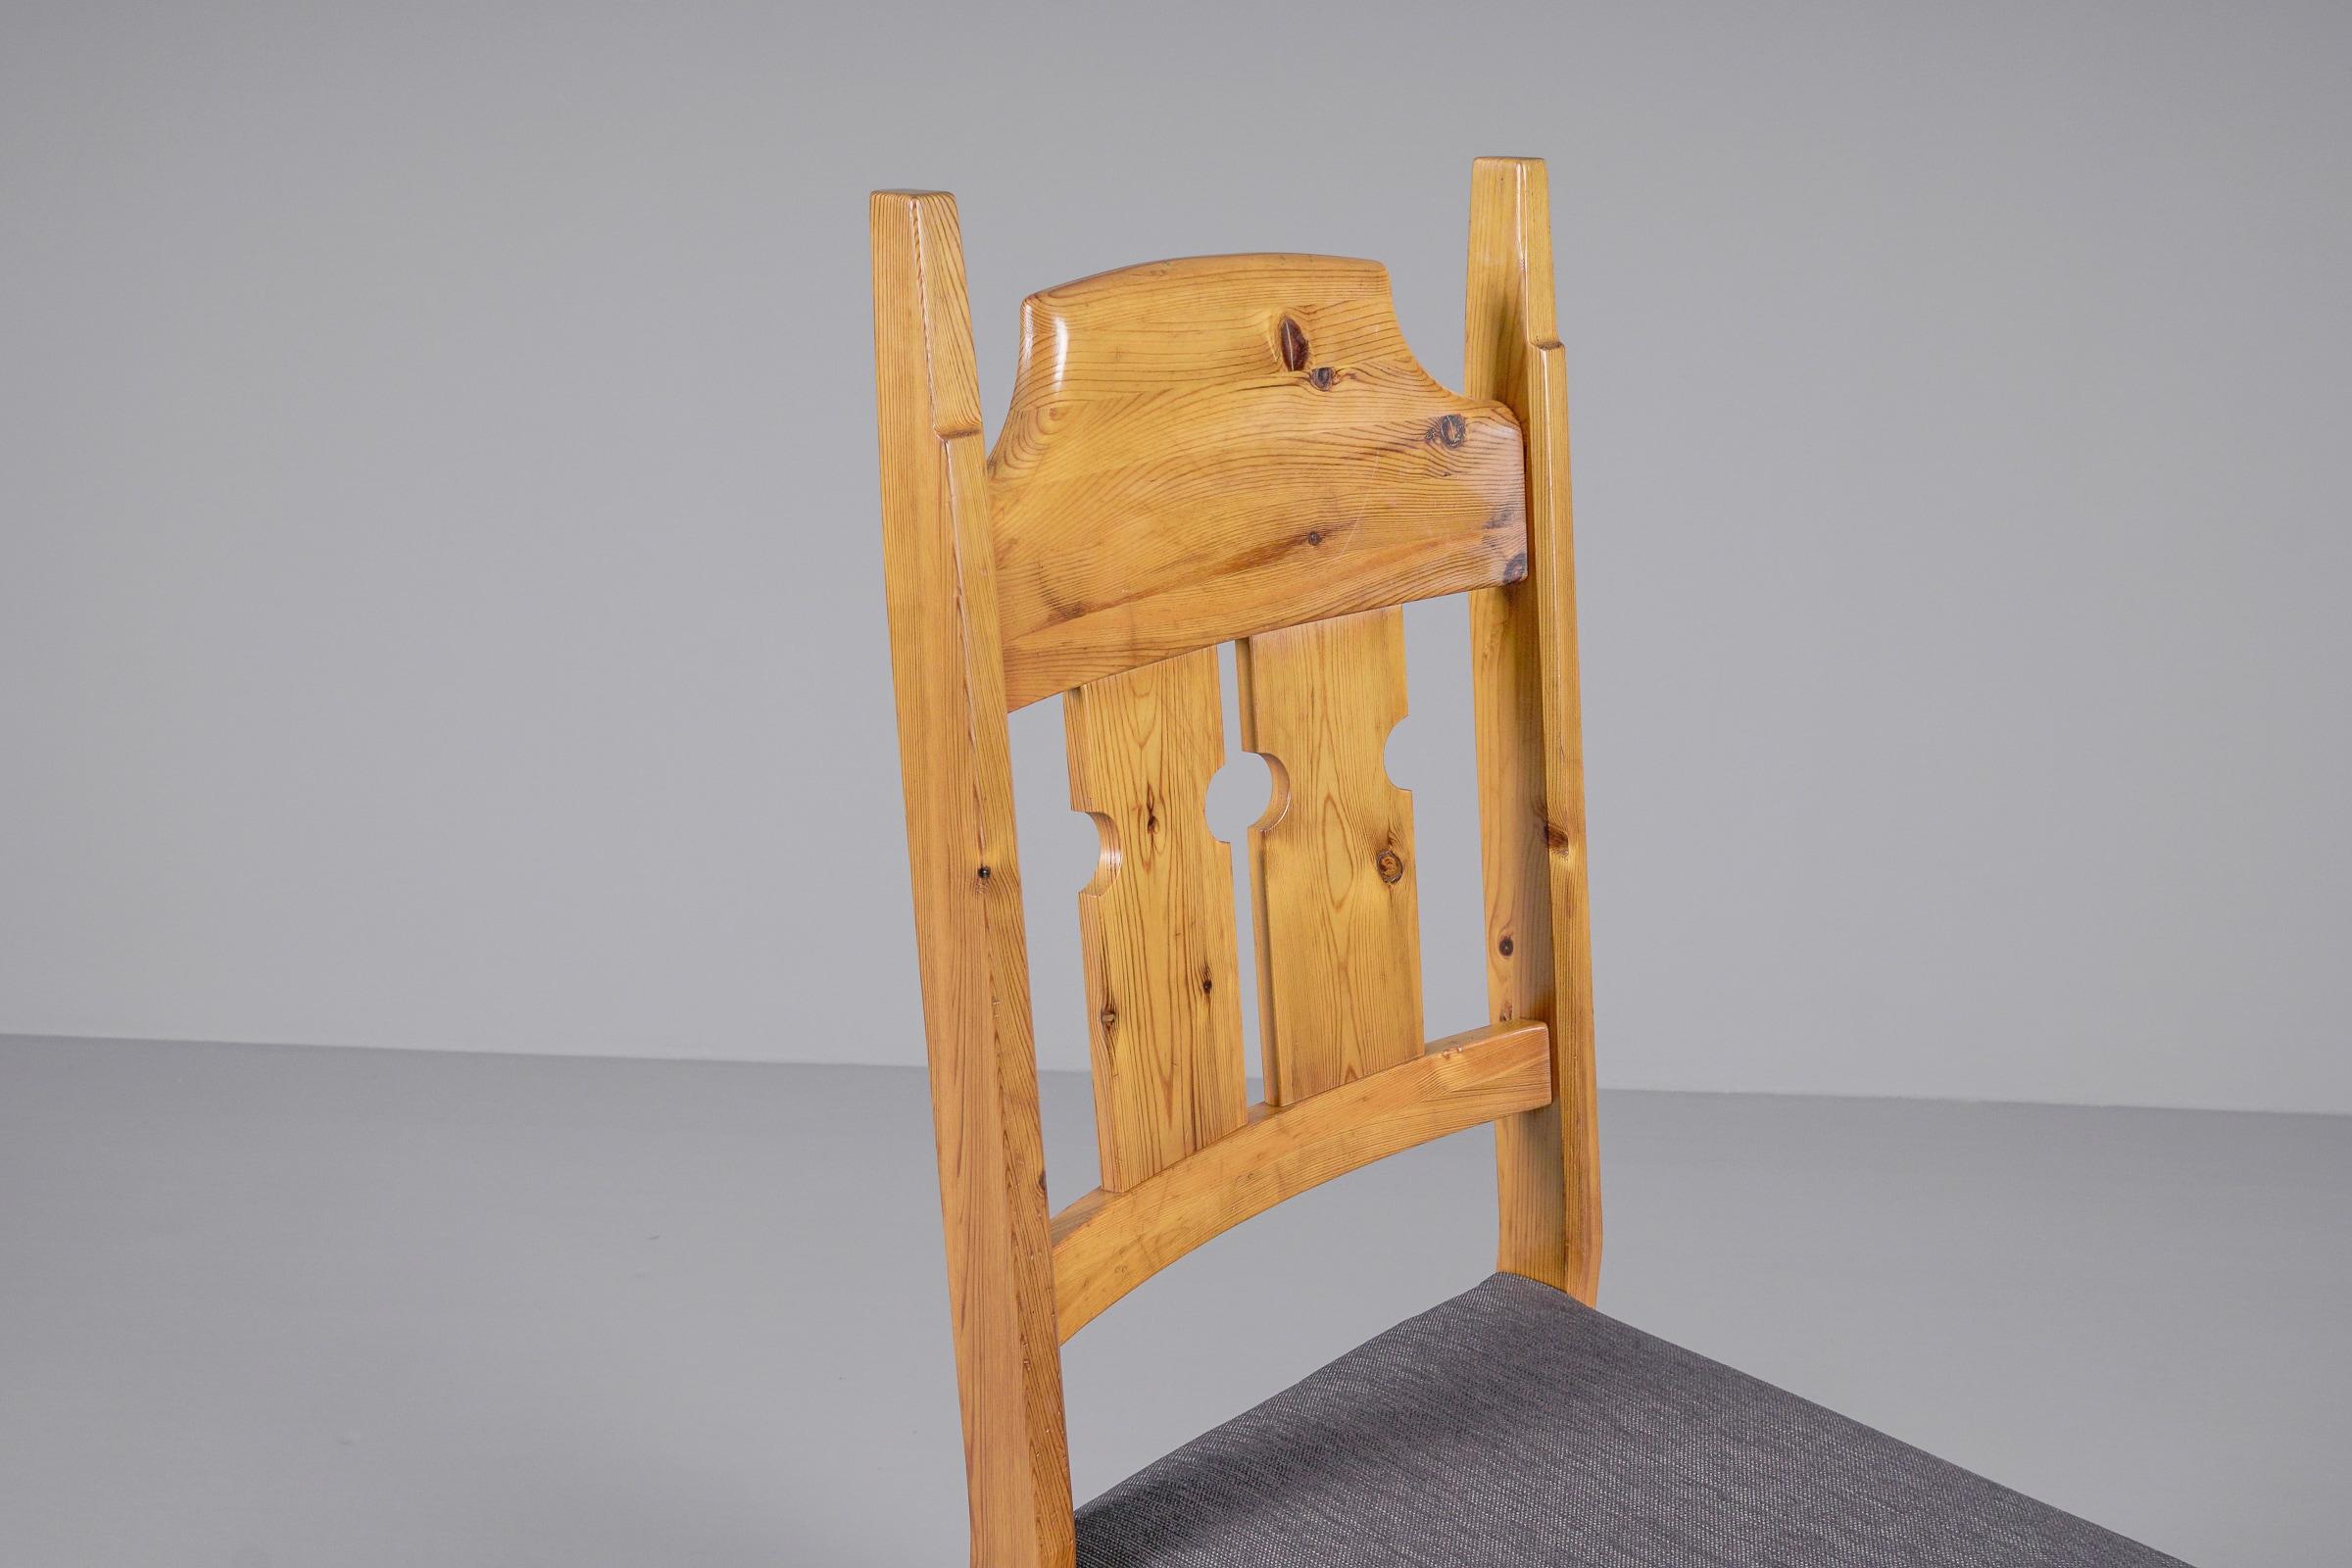  Set of 4 Swedish Pine Chairs by Gilbert Marklund for Furusnickarn AB, 1970s For Sale 11